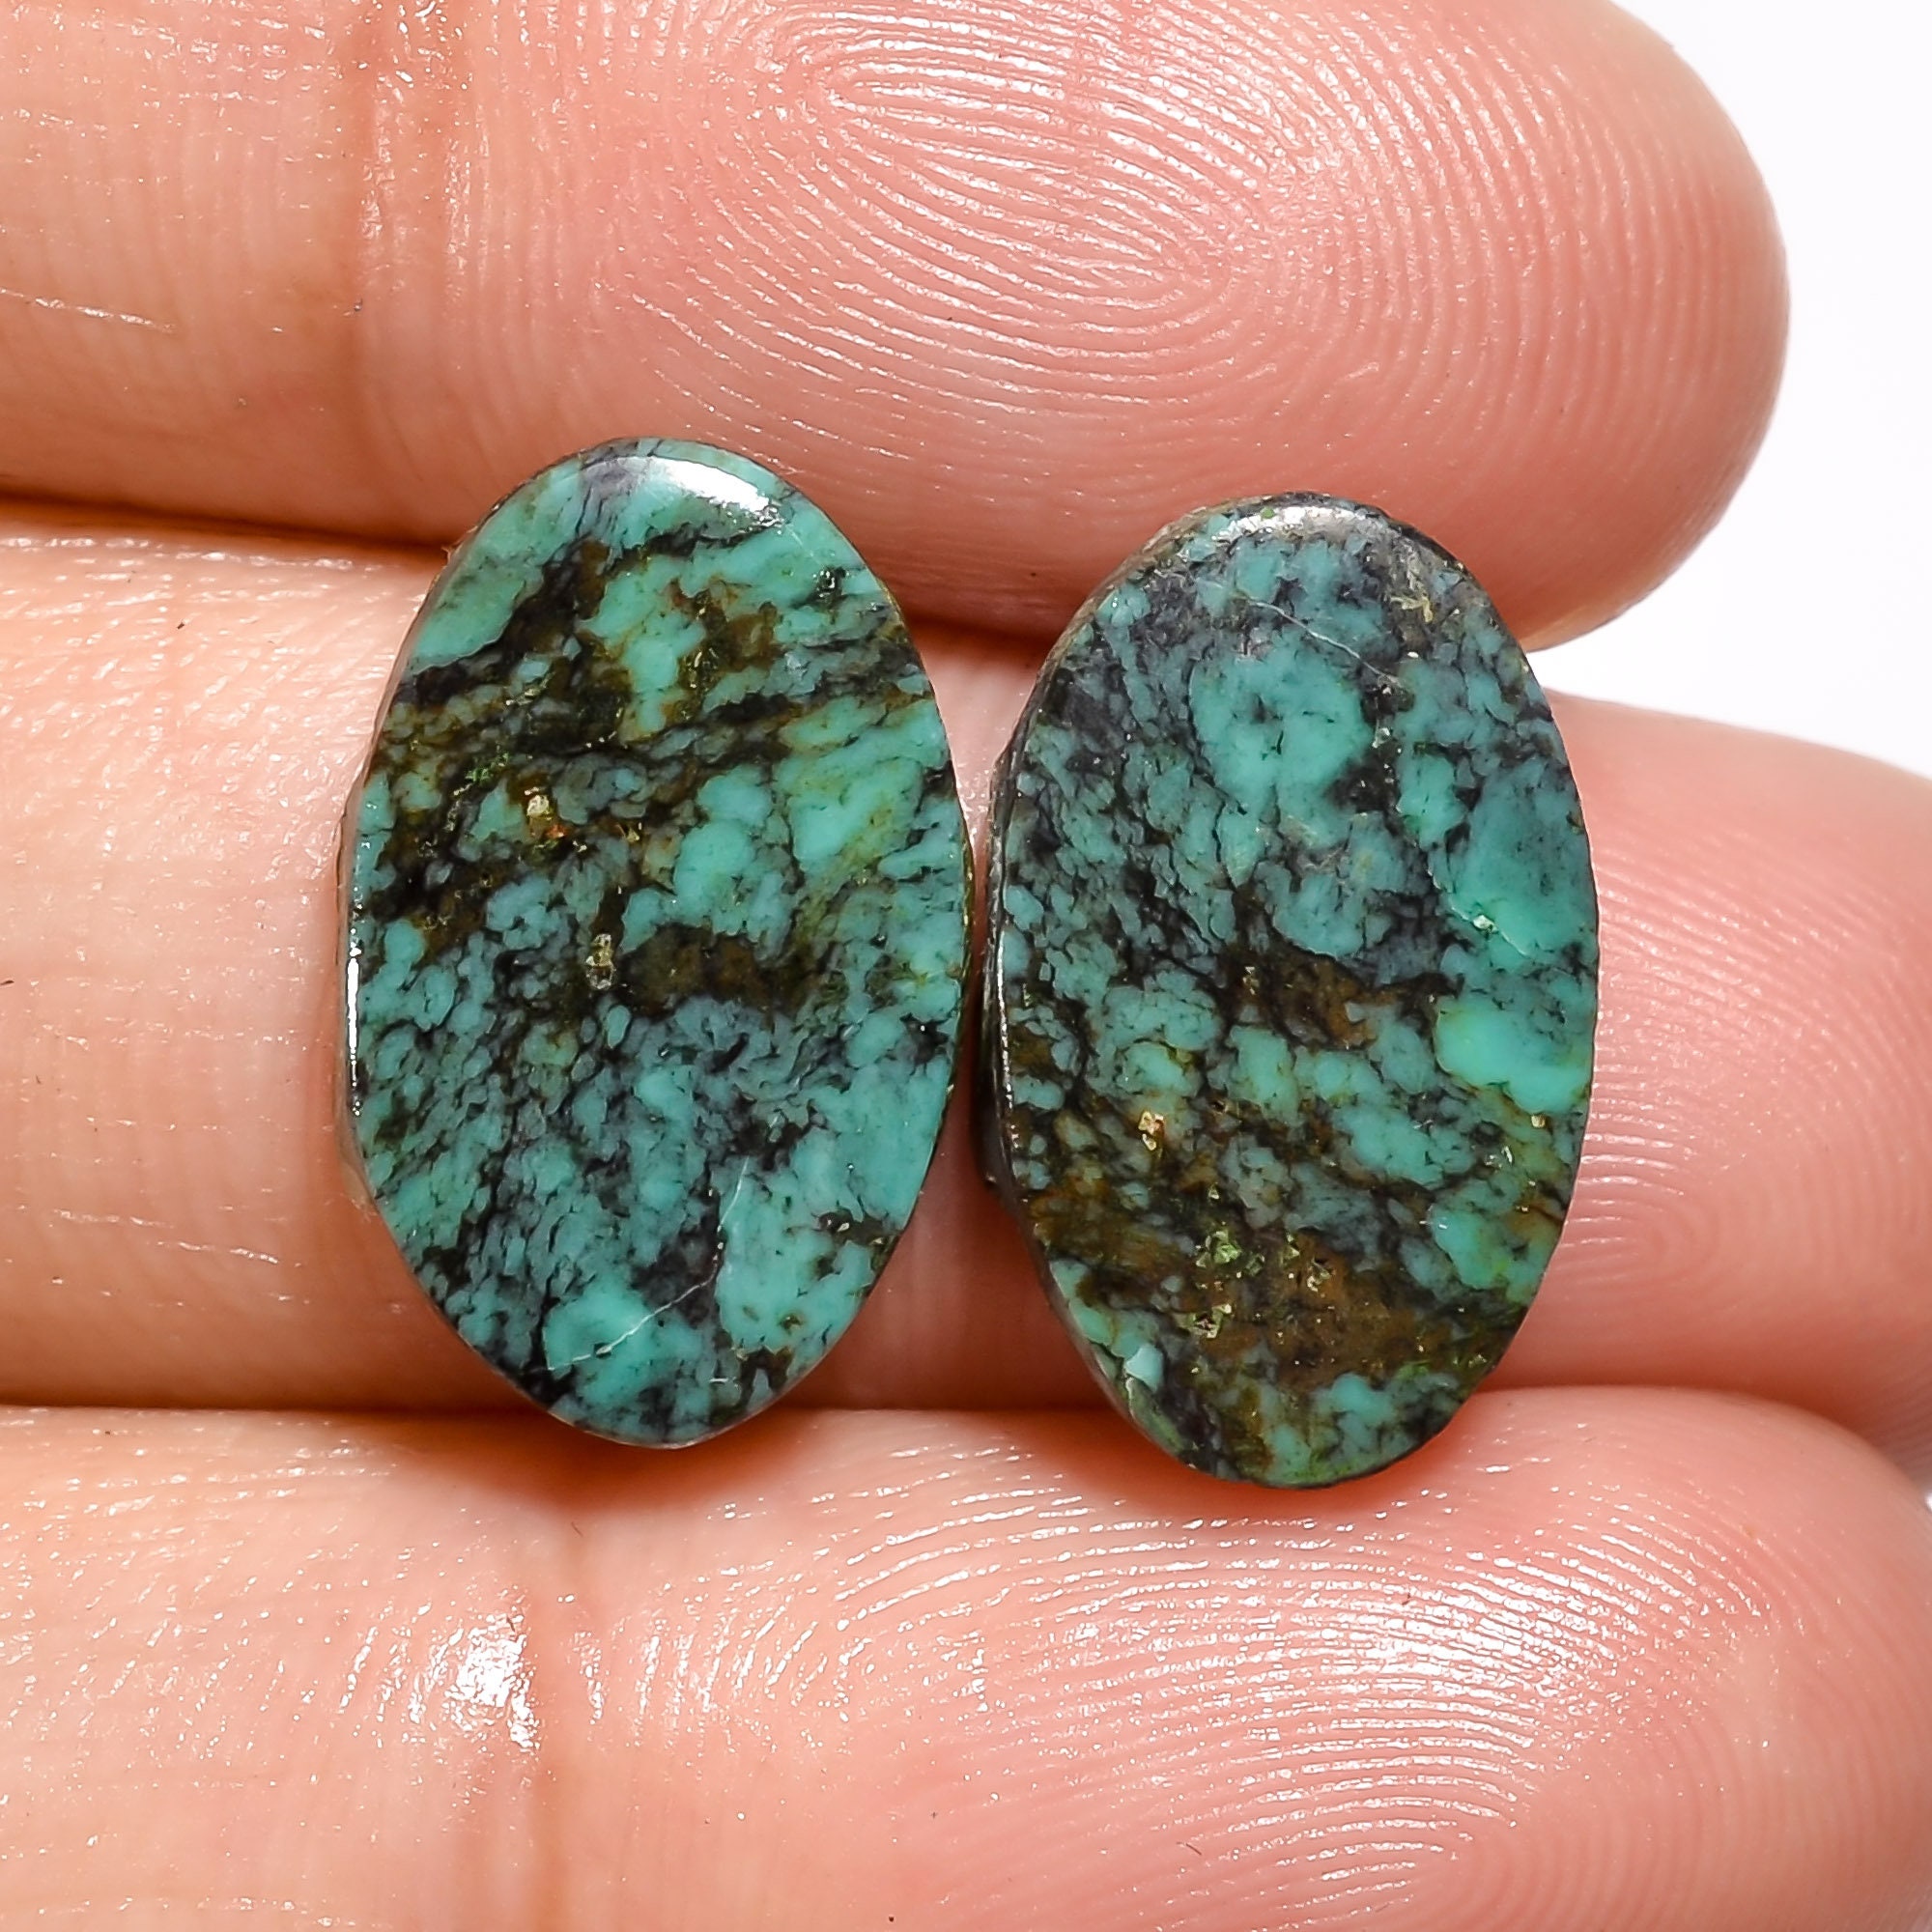 Gorgeous Top Grade Quality 100% Natural Tibetan Turquoise Oval Shape Cabochon Loose Gemstone  For Making Jewelry 11 Ct 16X13X6 mm JMK-11737